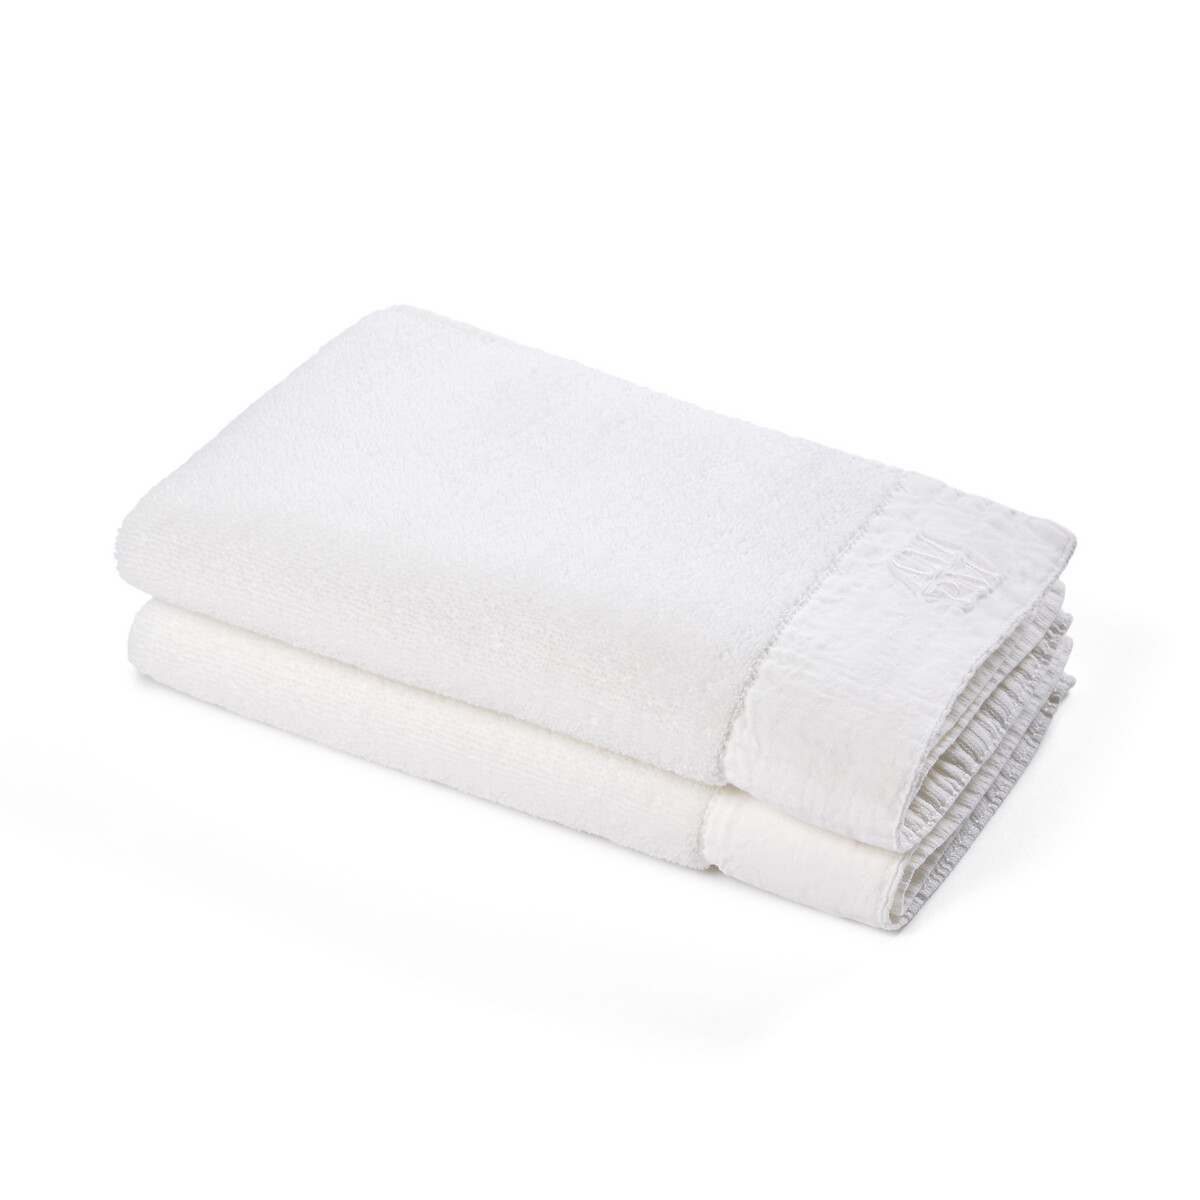 Set of 2 Helmae 100% Organic Cotton Guest Towels